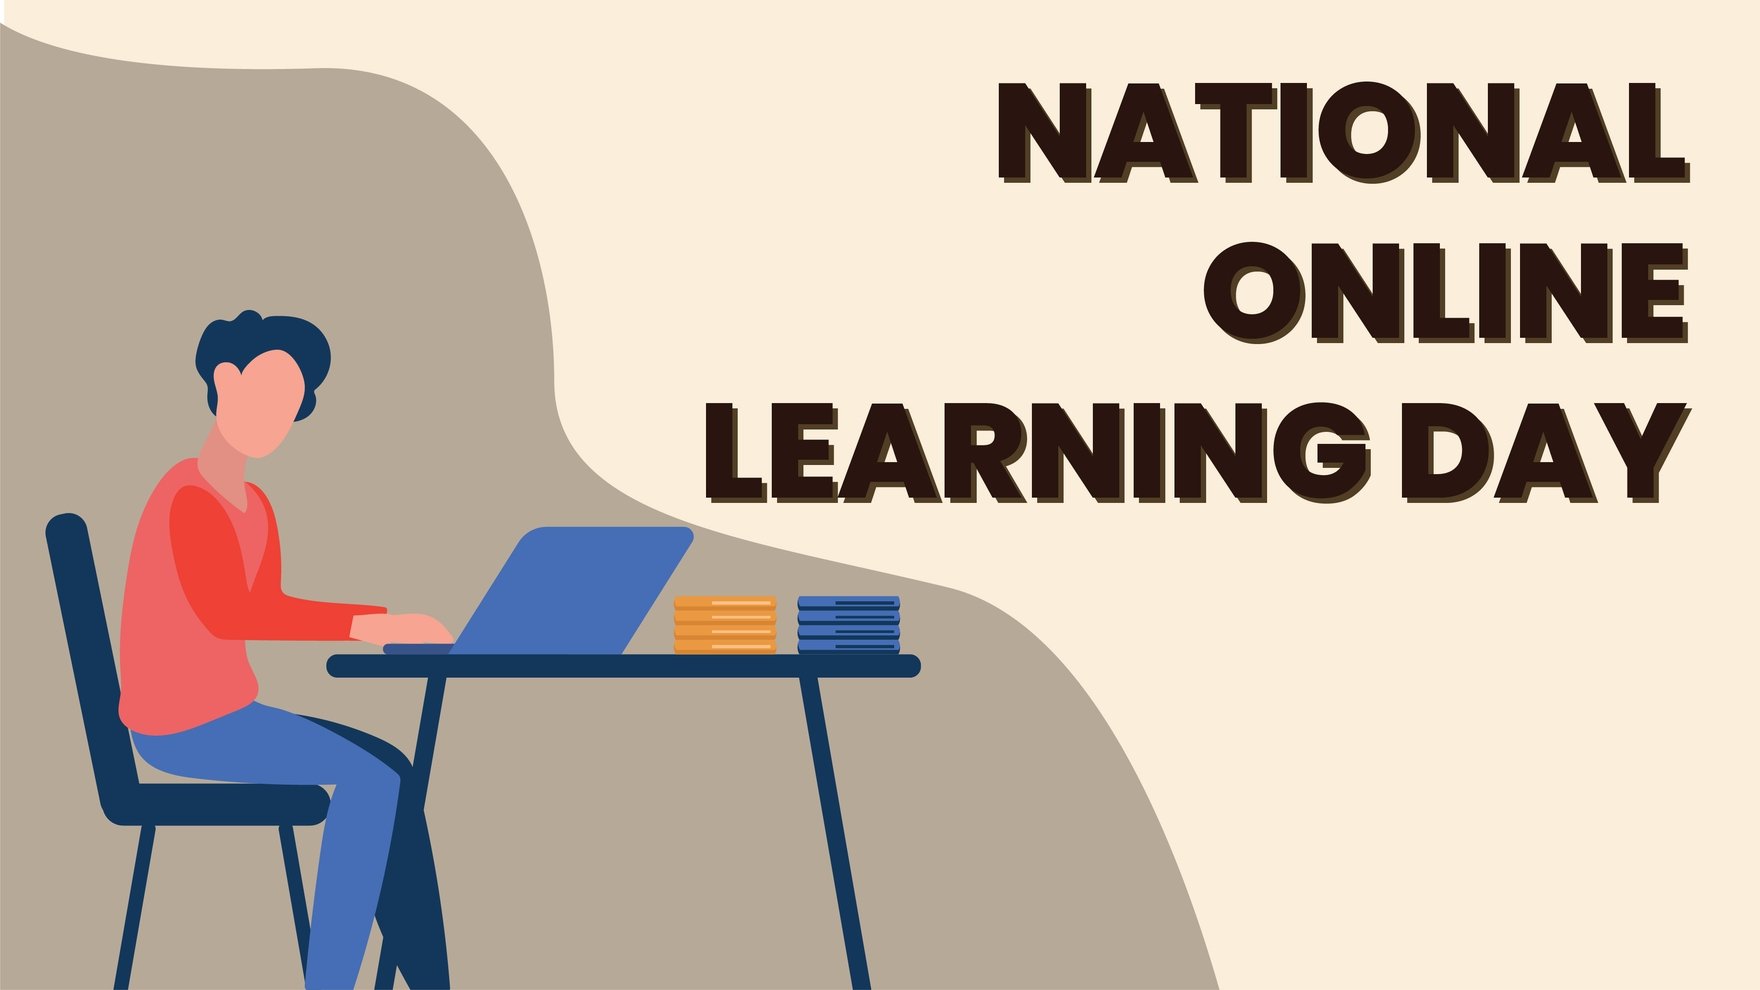 National Online Learning Day Image Background